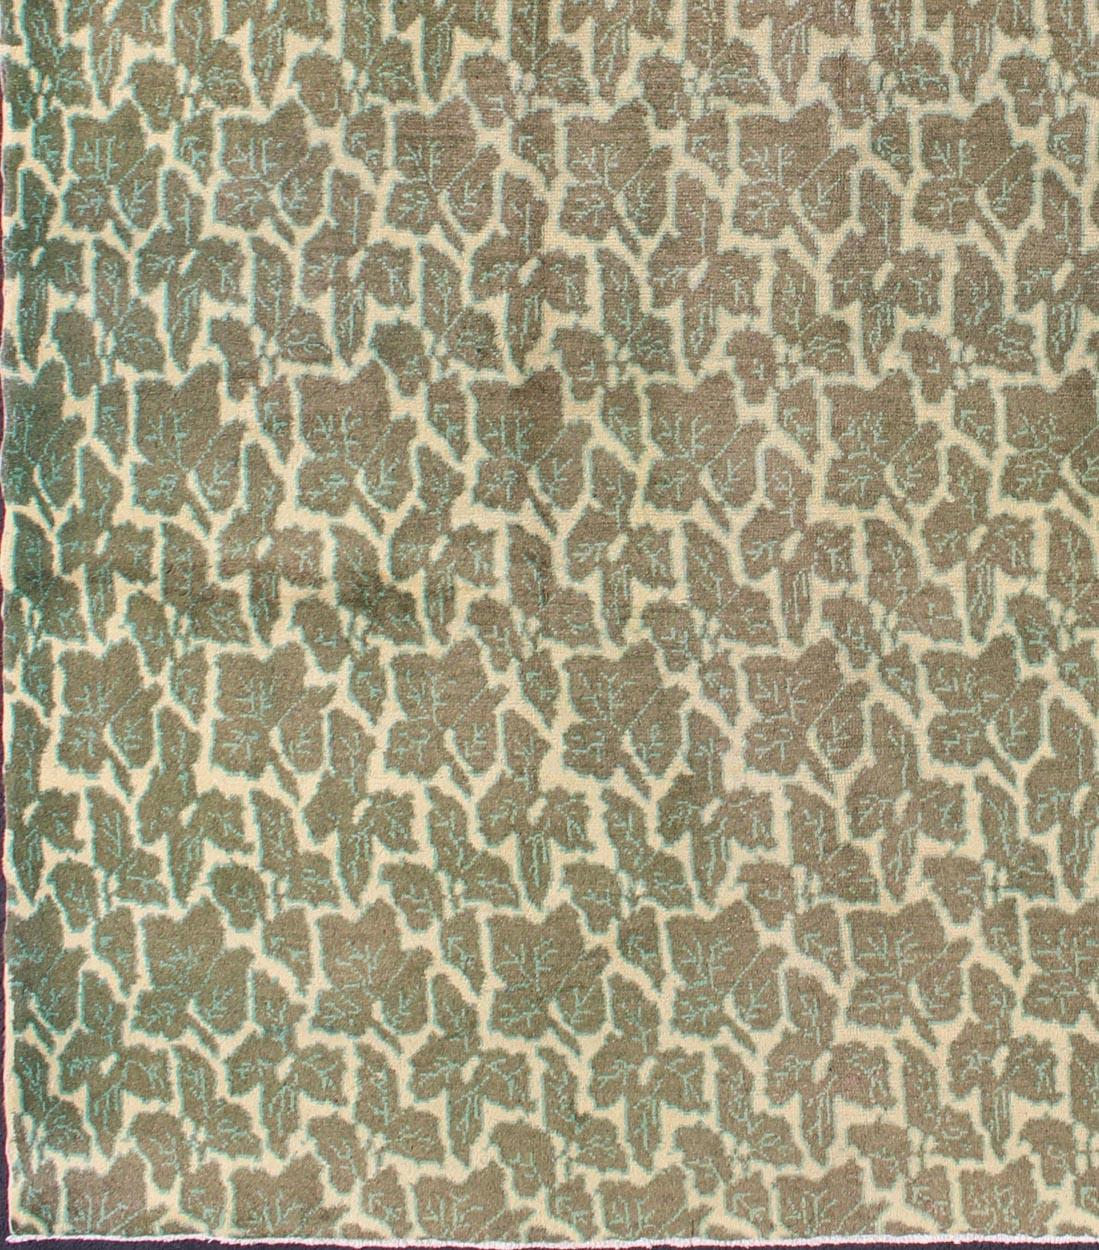 Measurements: 7' x 8'8.
Rendered in green and soft yellow tones with a leaf pattern, this mid-century patterned rug is unique in both color palette and design, rendering it a great fit for modern, transitional, classic and casual